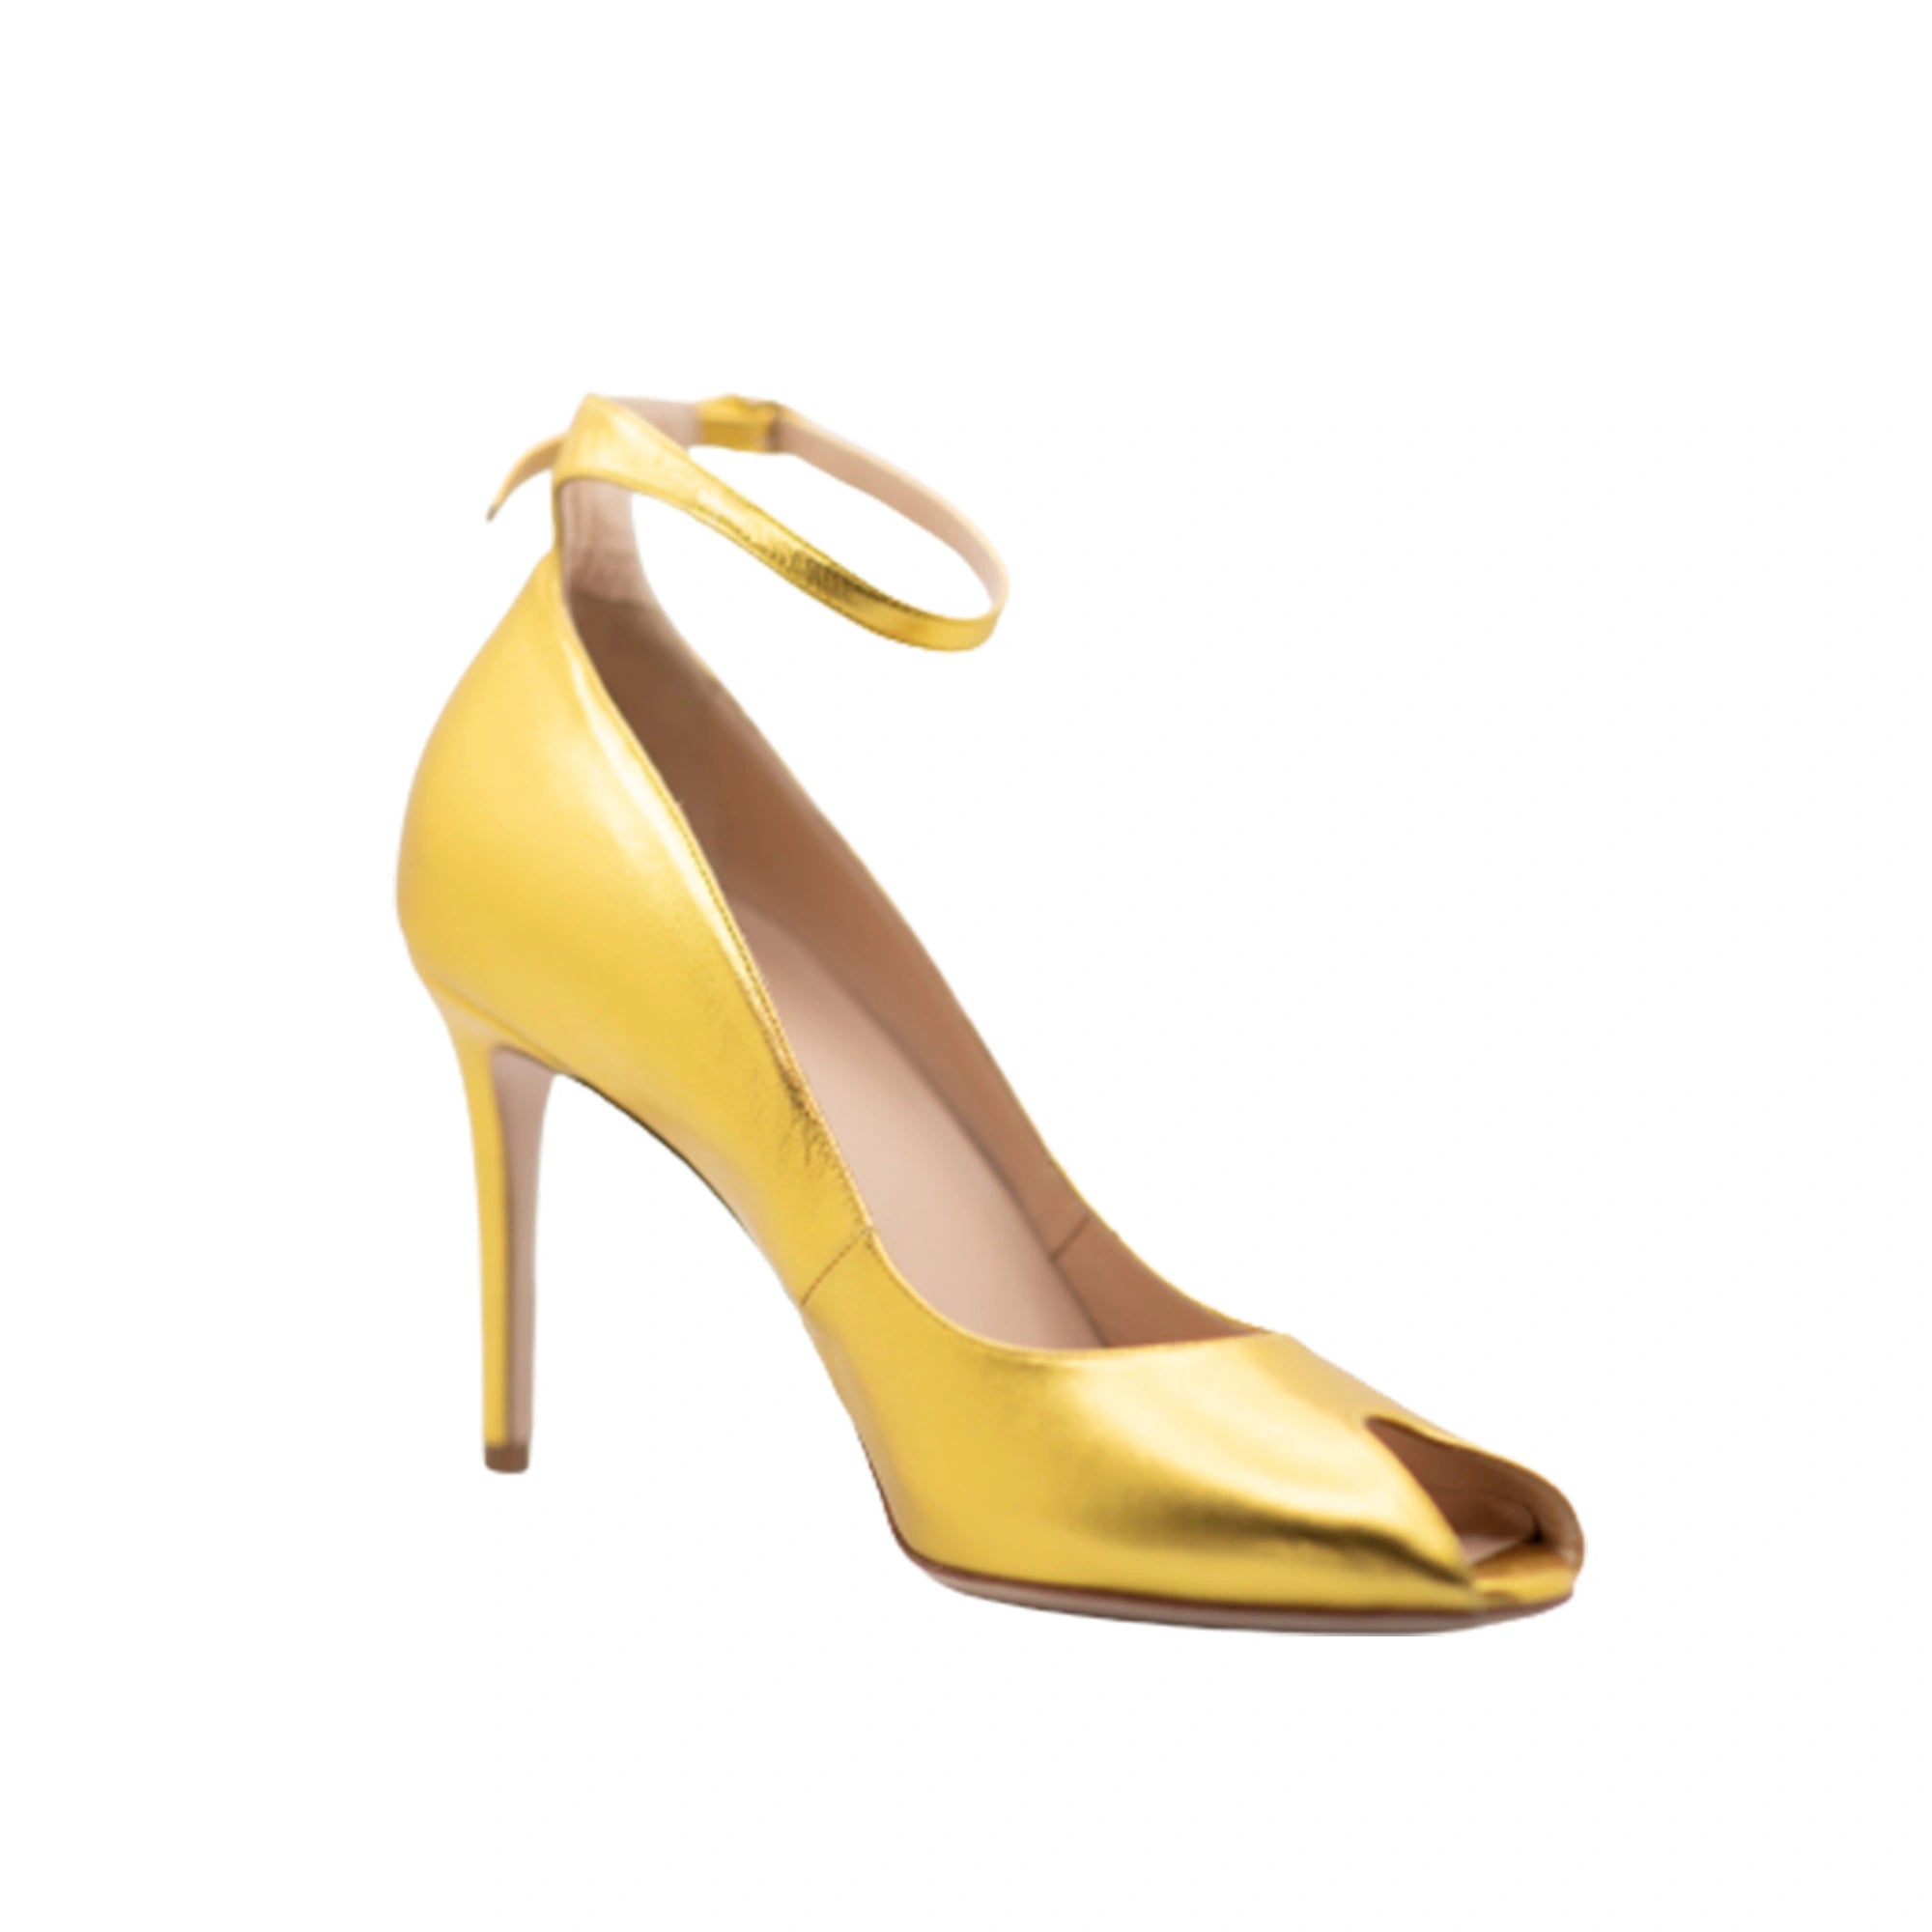 Gold Open Toe Heels with Ankle Straps | Anne Fontaine UK